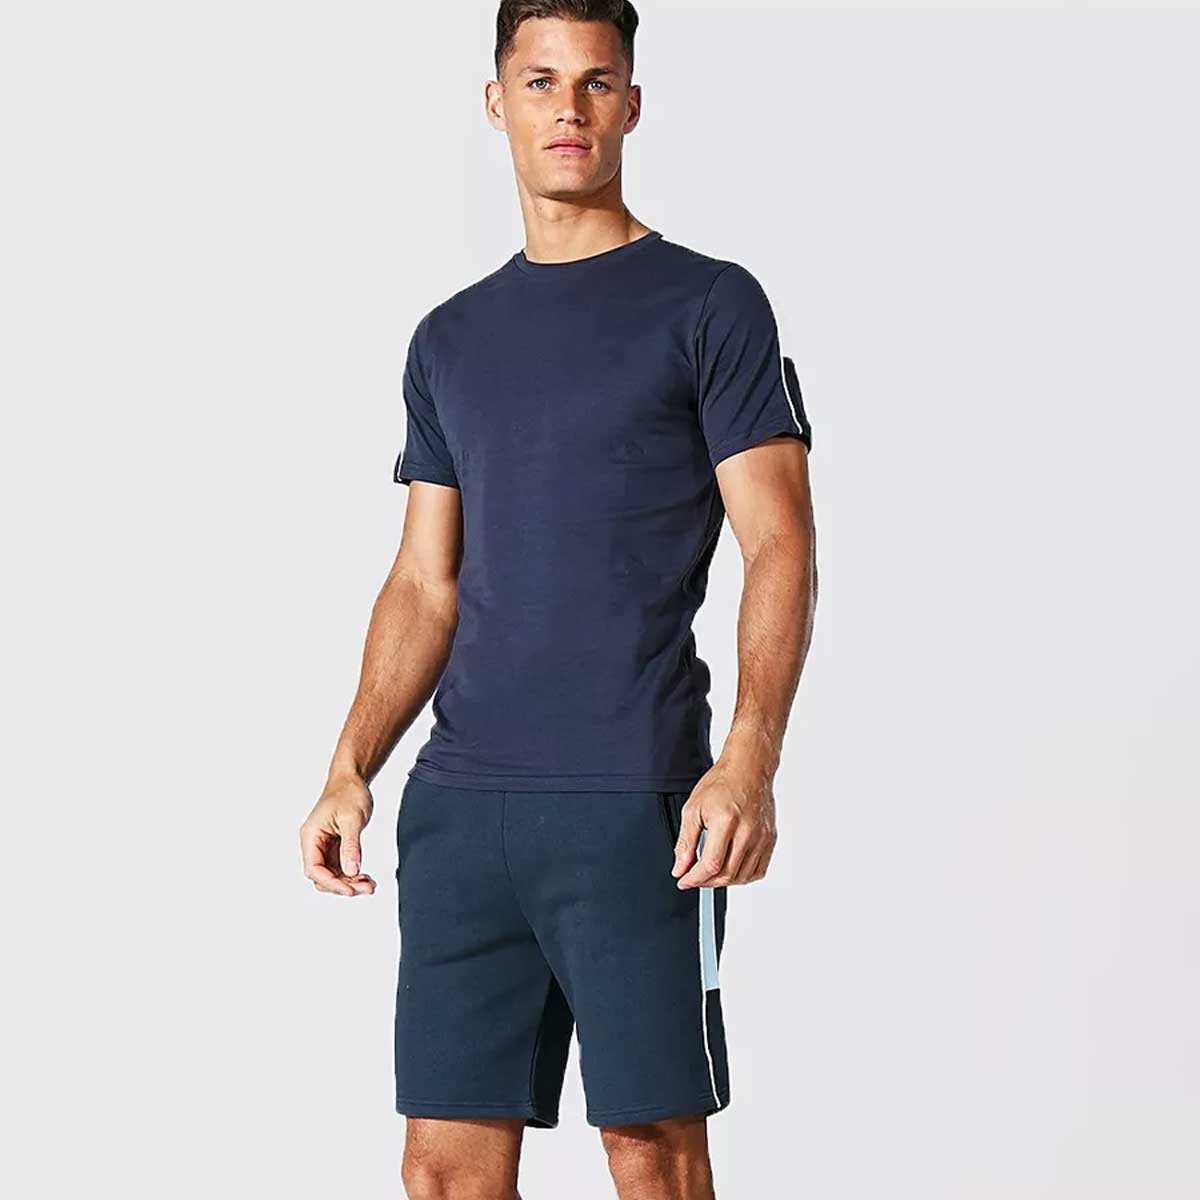 Promotional Shorts Manufacturers in Chandler